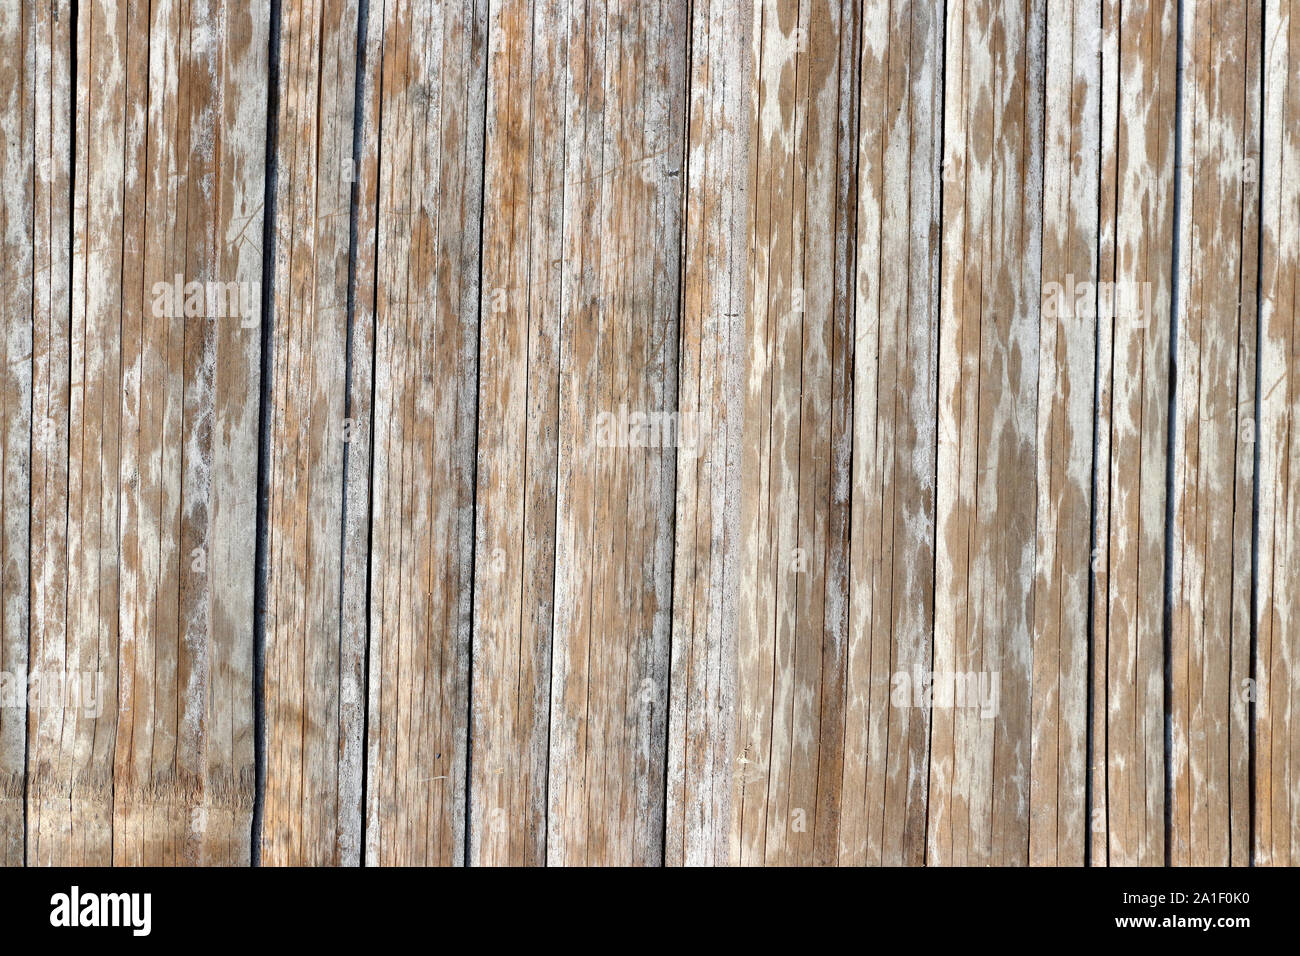 Close Up Of Bamboo Wood Background Texture Stock Photo, Picture and Royalty  Free Image. Image 15629531.